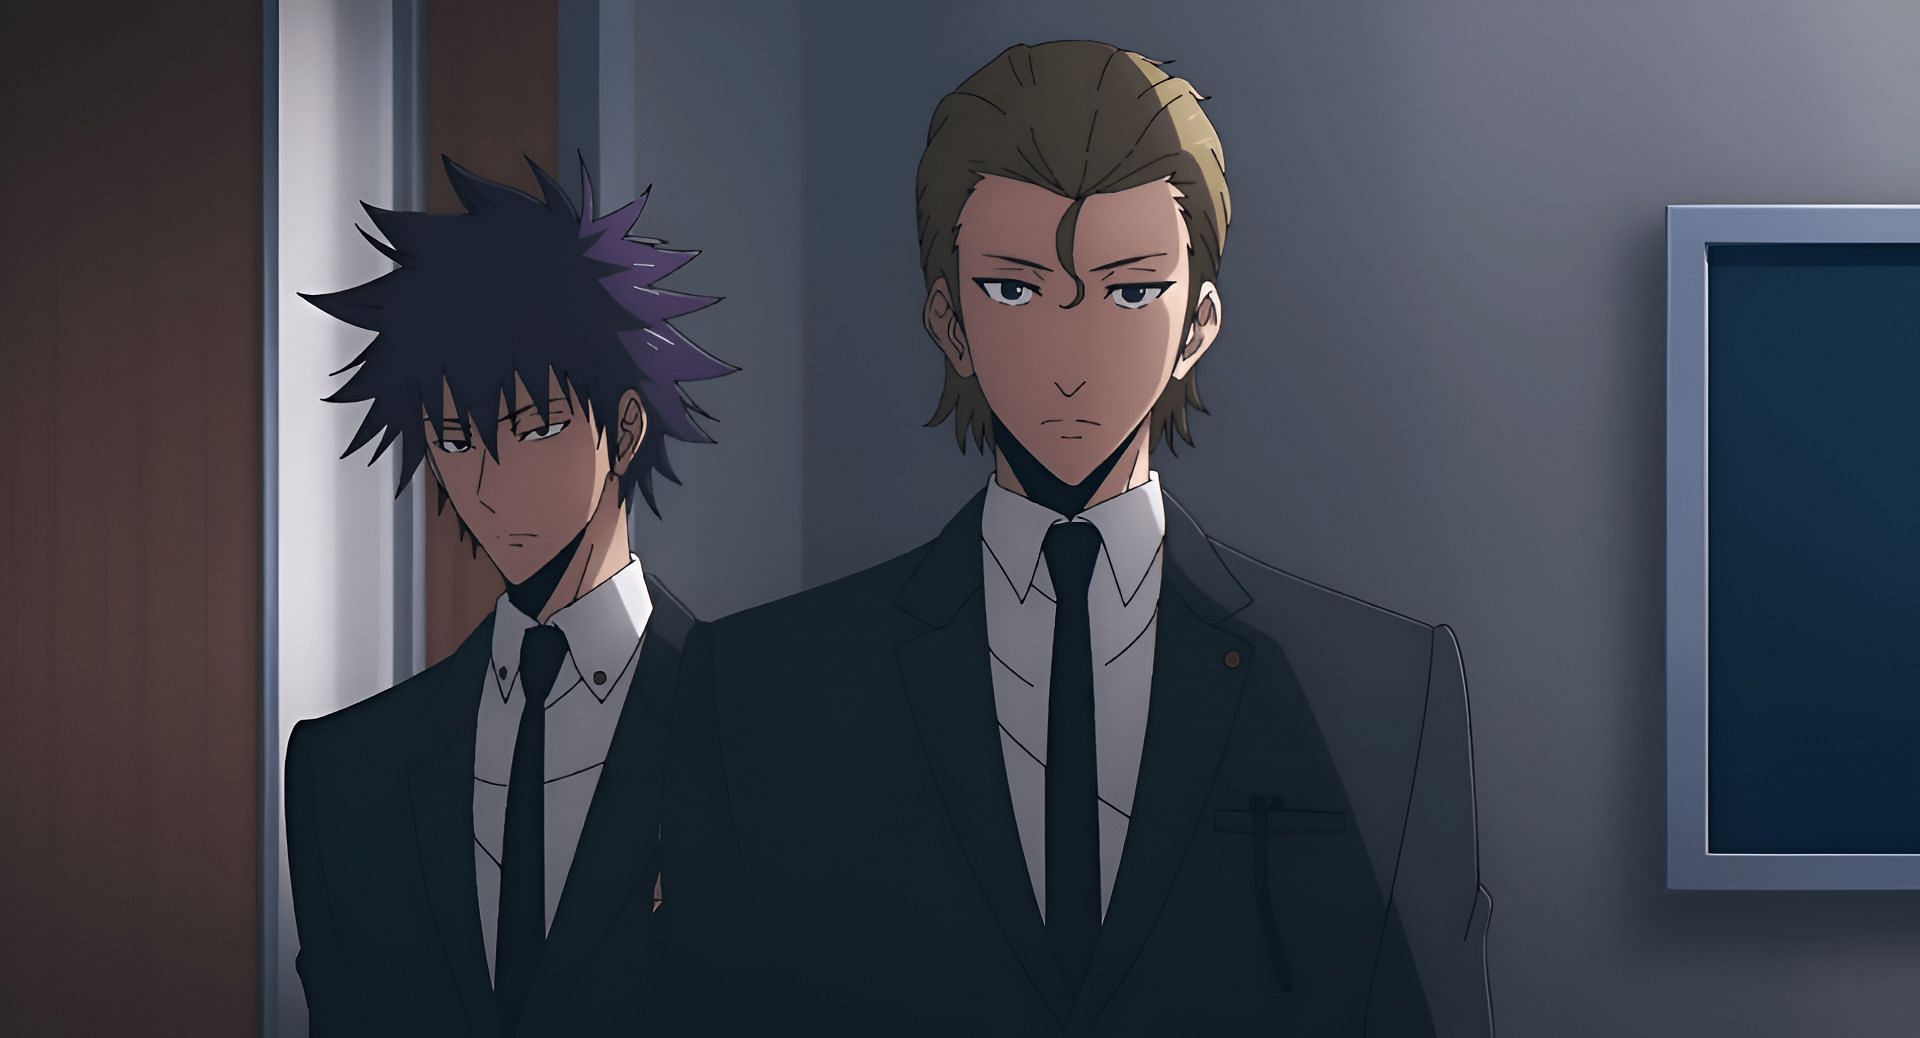 Taesik (left) and Woo Jinchul (right) as seen in the anime (Image via A-1 Pictures)